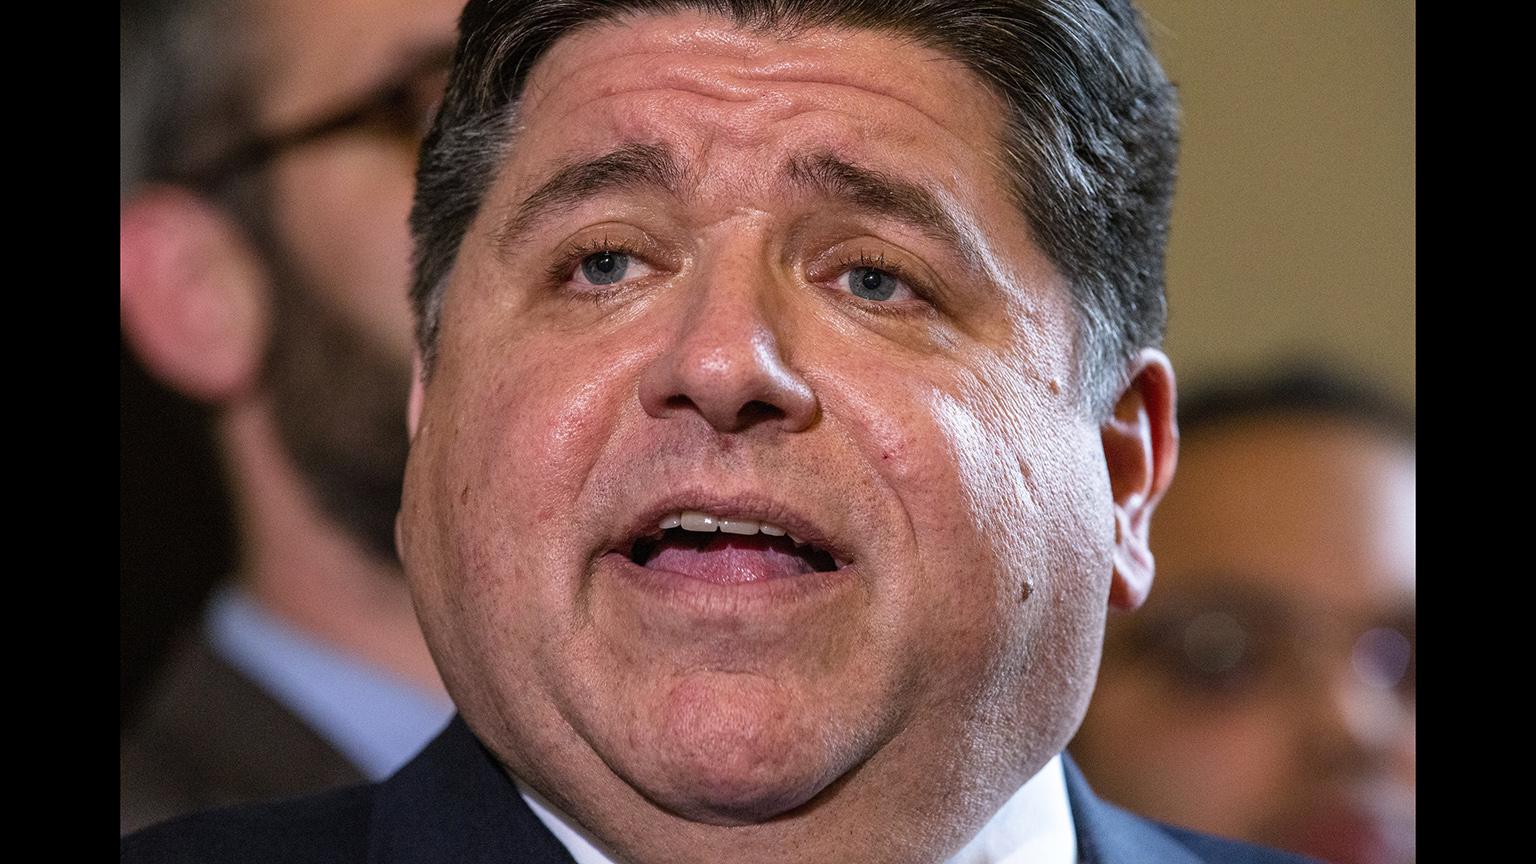 In this file photo, Gov. J.B. Pritzker answers questions about Senate Bill 1, a bill to raise the state’s minimum wage to 5 an hour by 2025, after it passed the Illinois Senate on Thursday, Feb. 7, 2019. (Justin L. Fowler / The State Journal-Register via AP)